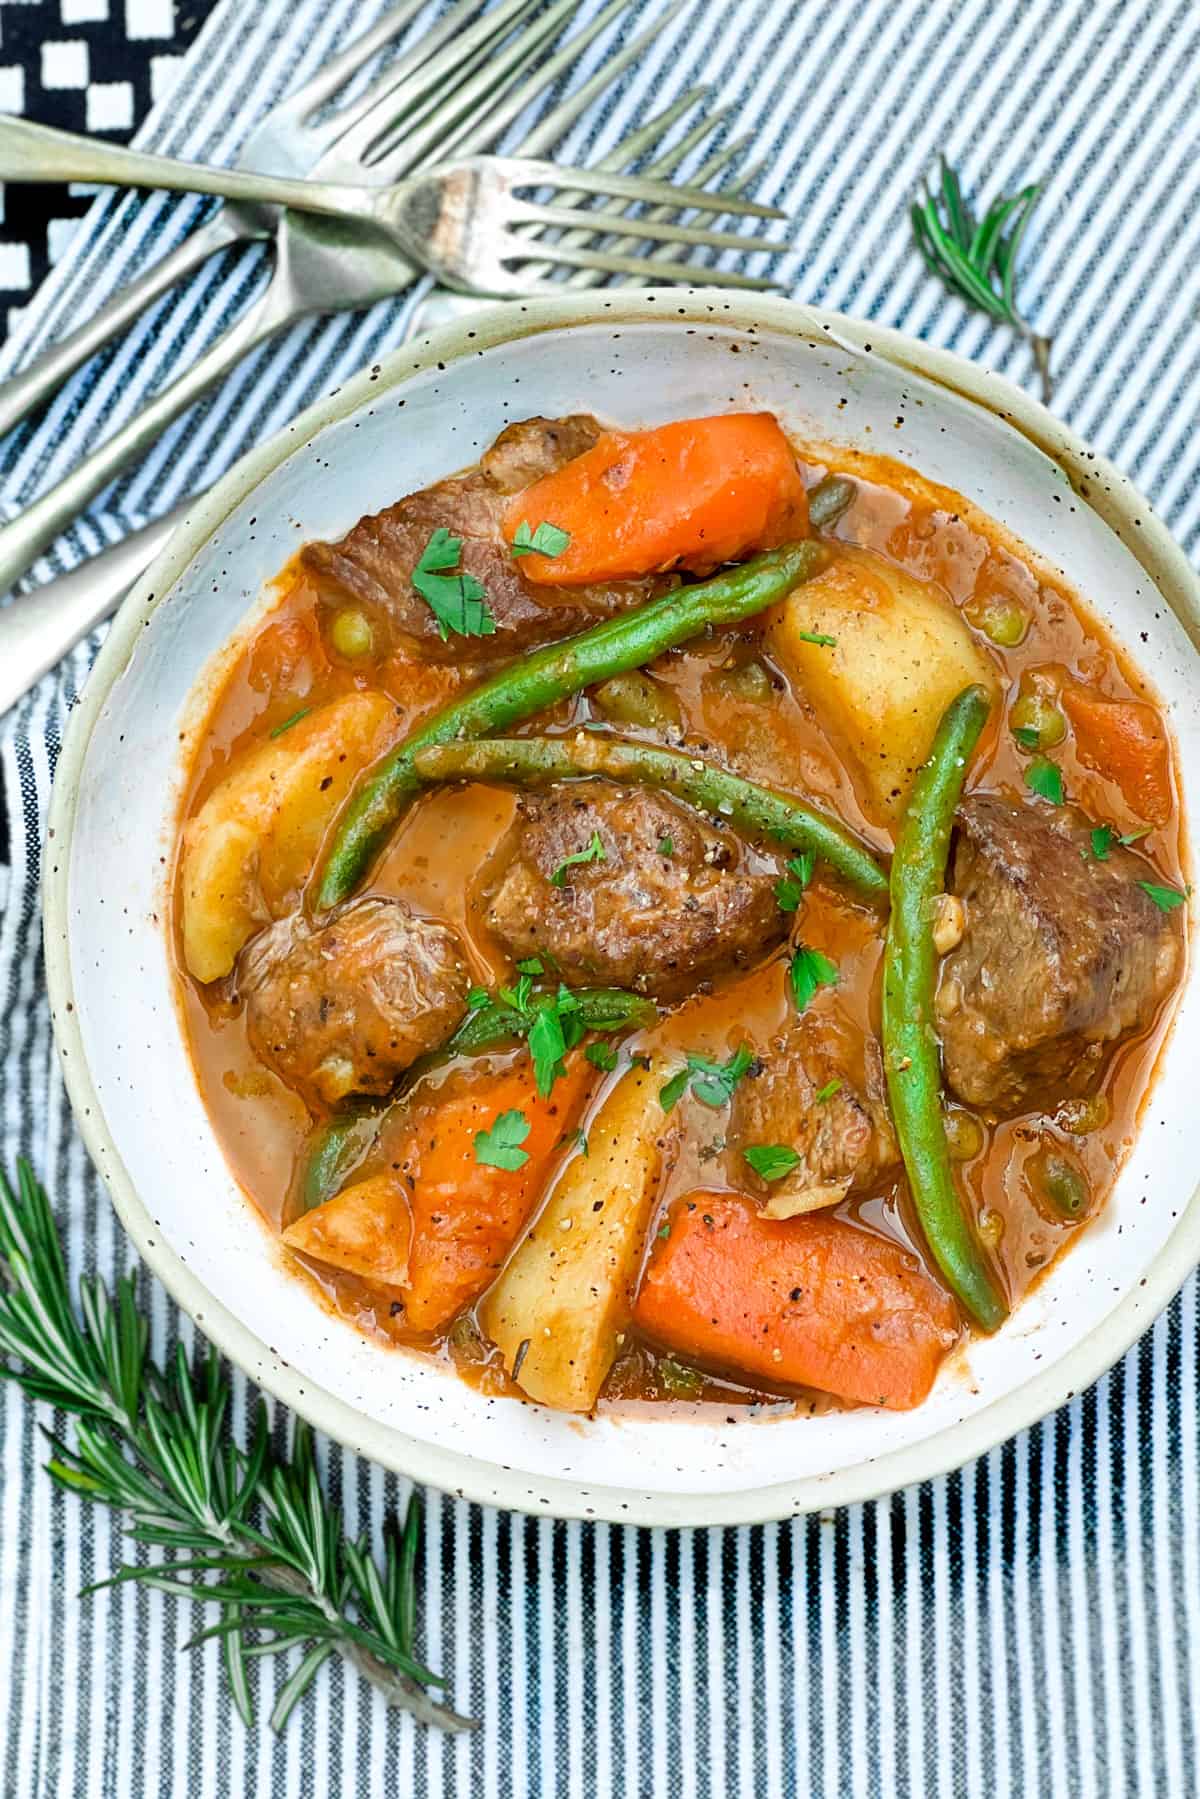 Bowl of lamb stew with potatoes, carrots and green beans.